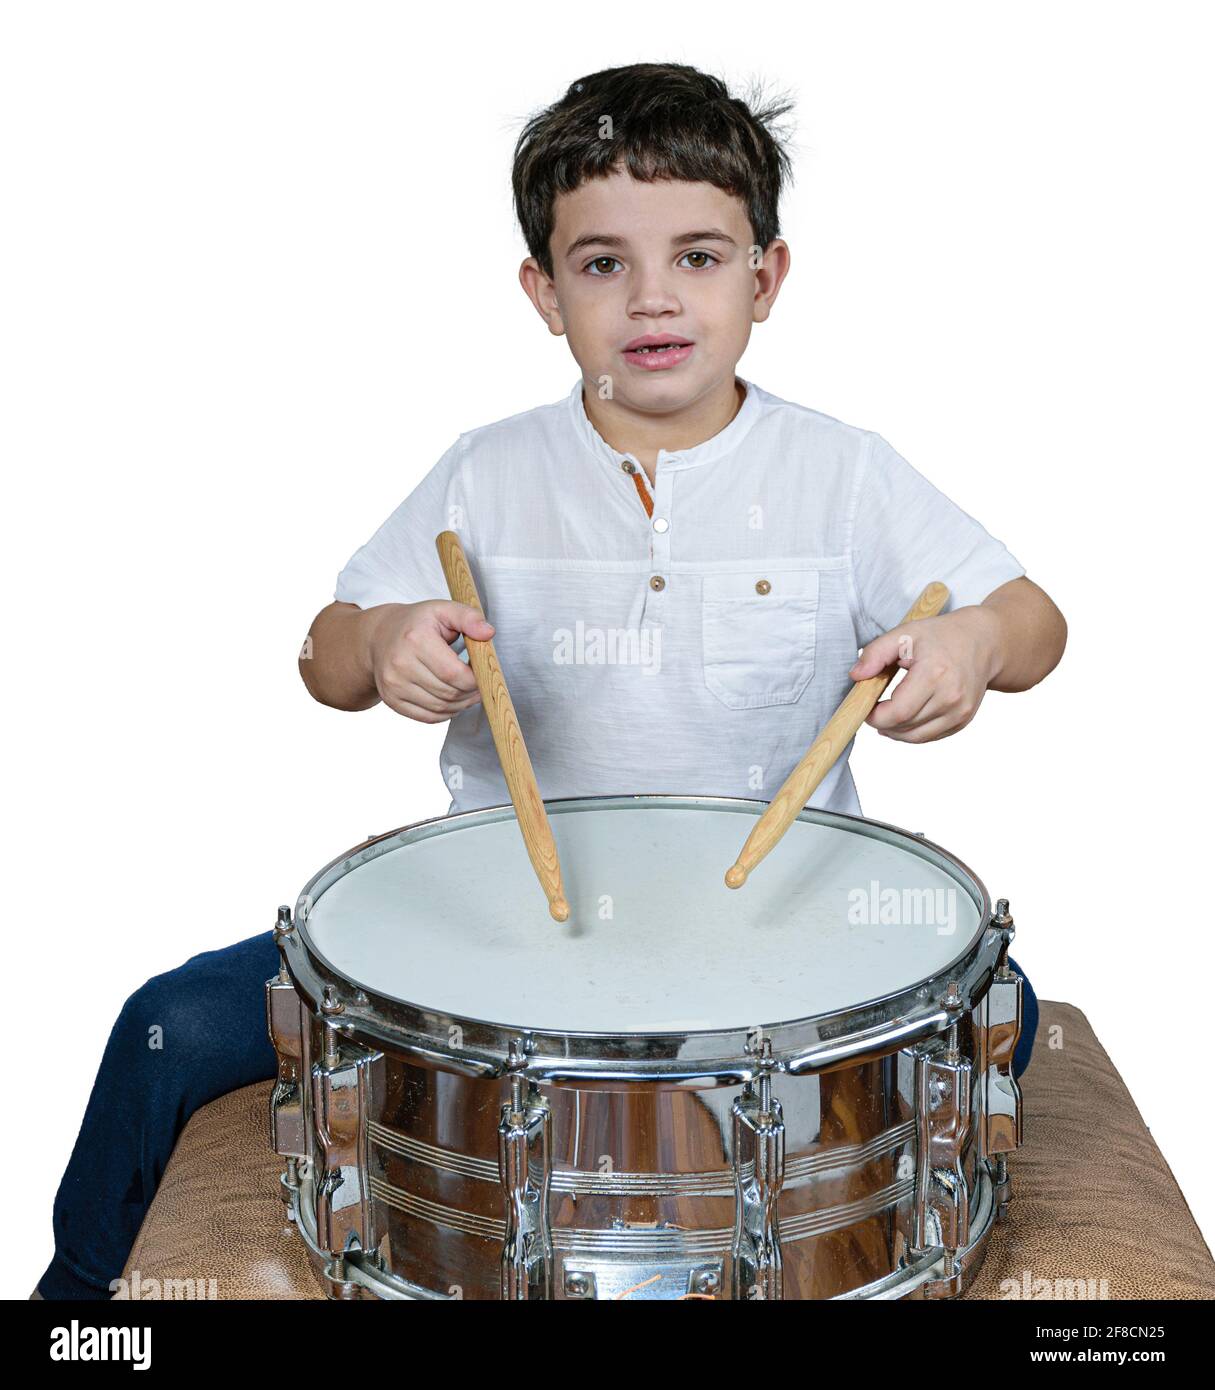 7 year old child staring at the camera and playing the drums. White background. Stock Photo